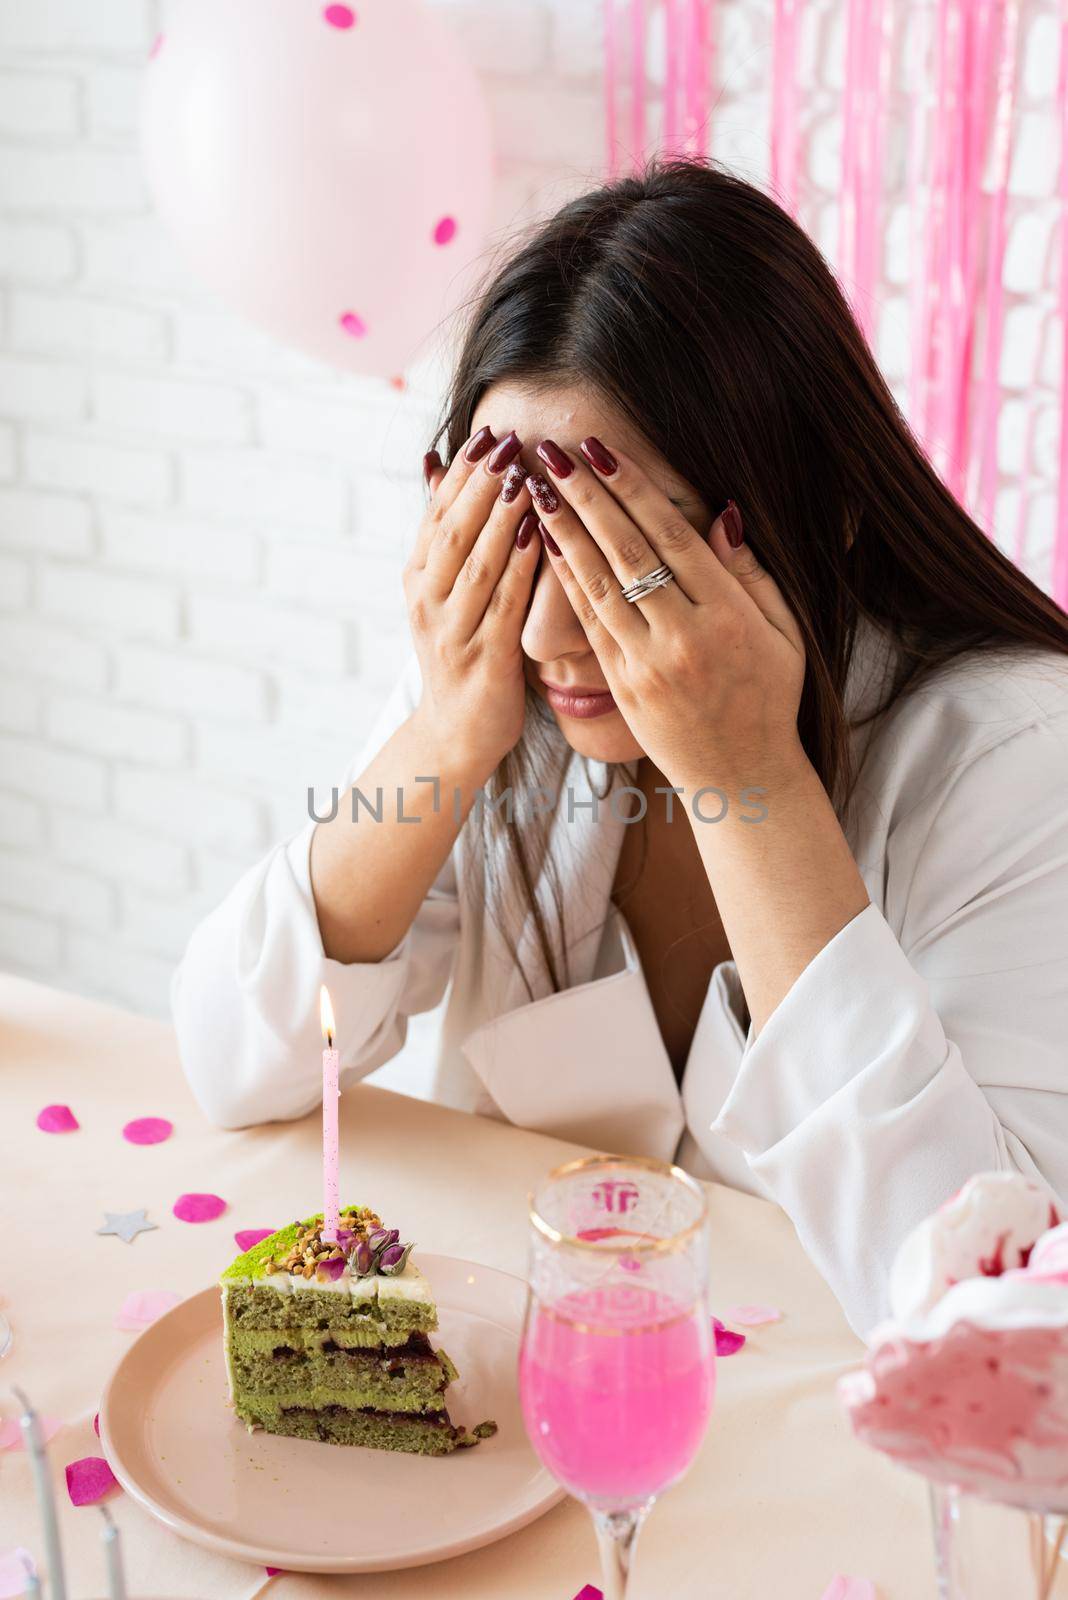 Birthday party. Birthday tables. Attractive brunette woman in white party clothes preparing birthday table with cakes, cakepops, macarons and other sweets, making wish